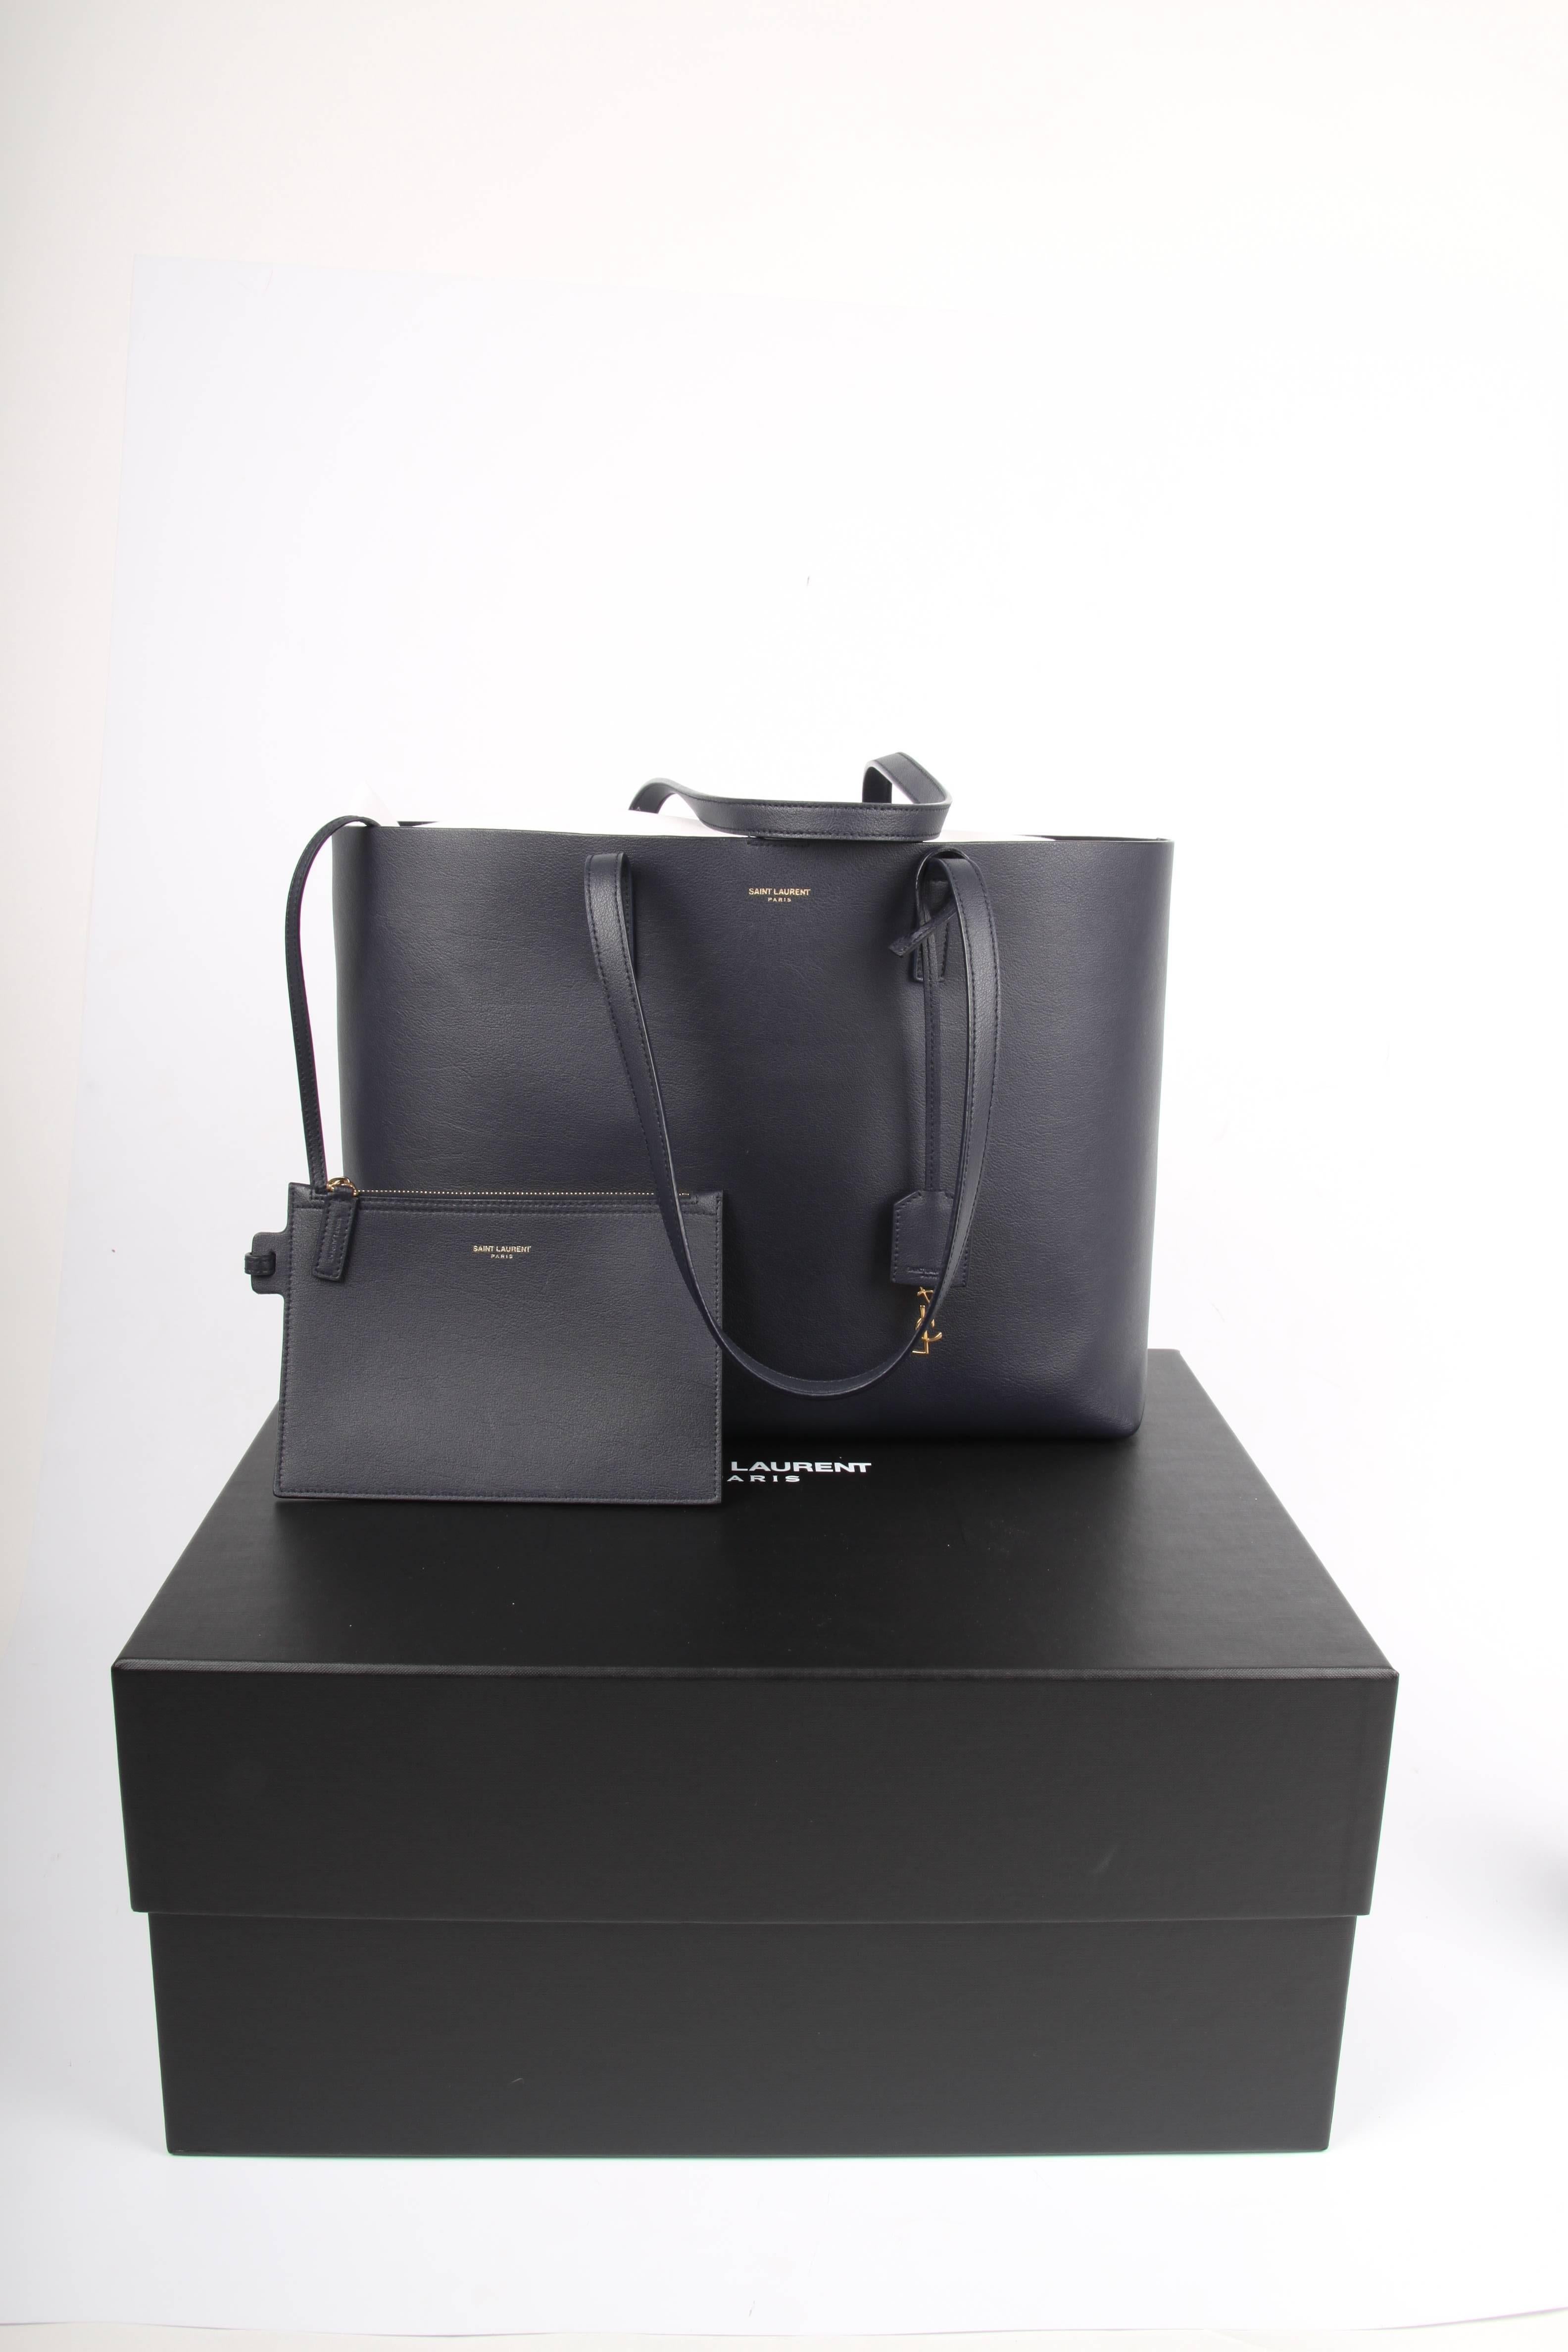 This bag is fantastic and sooo stylish! Dark blue calfskin leather shopper by Saint Laurent.

A rather large size with flat leather handles which can easily be worn on the shoulder. On one of the handles a so-called clochette is attached, it holds a